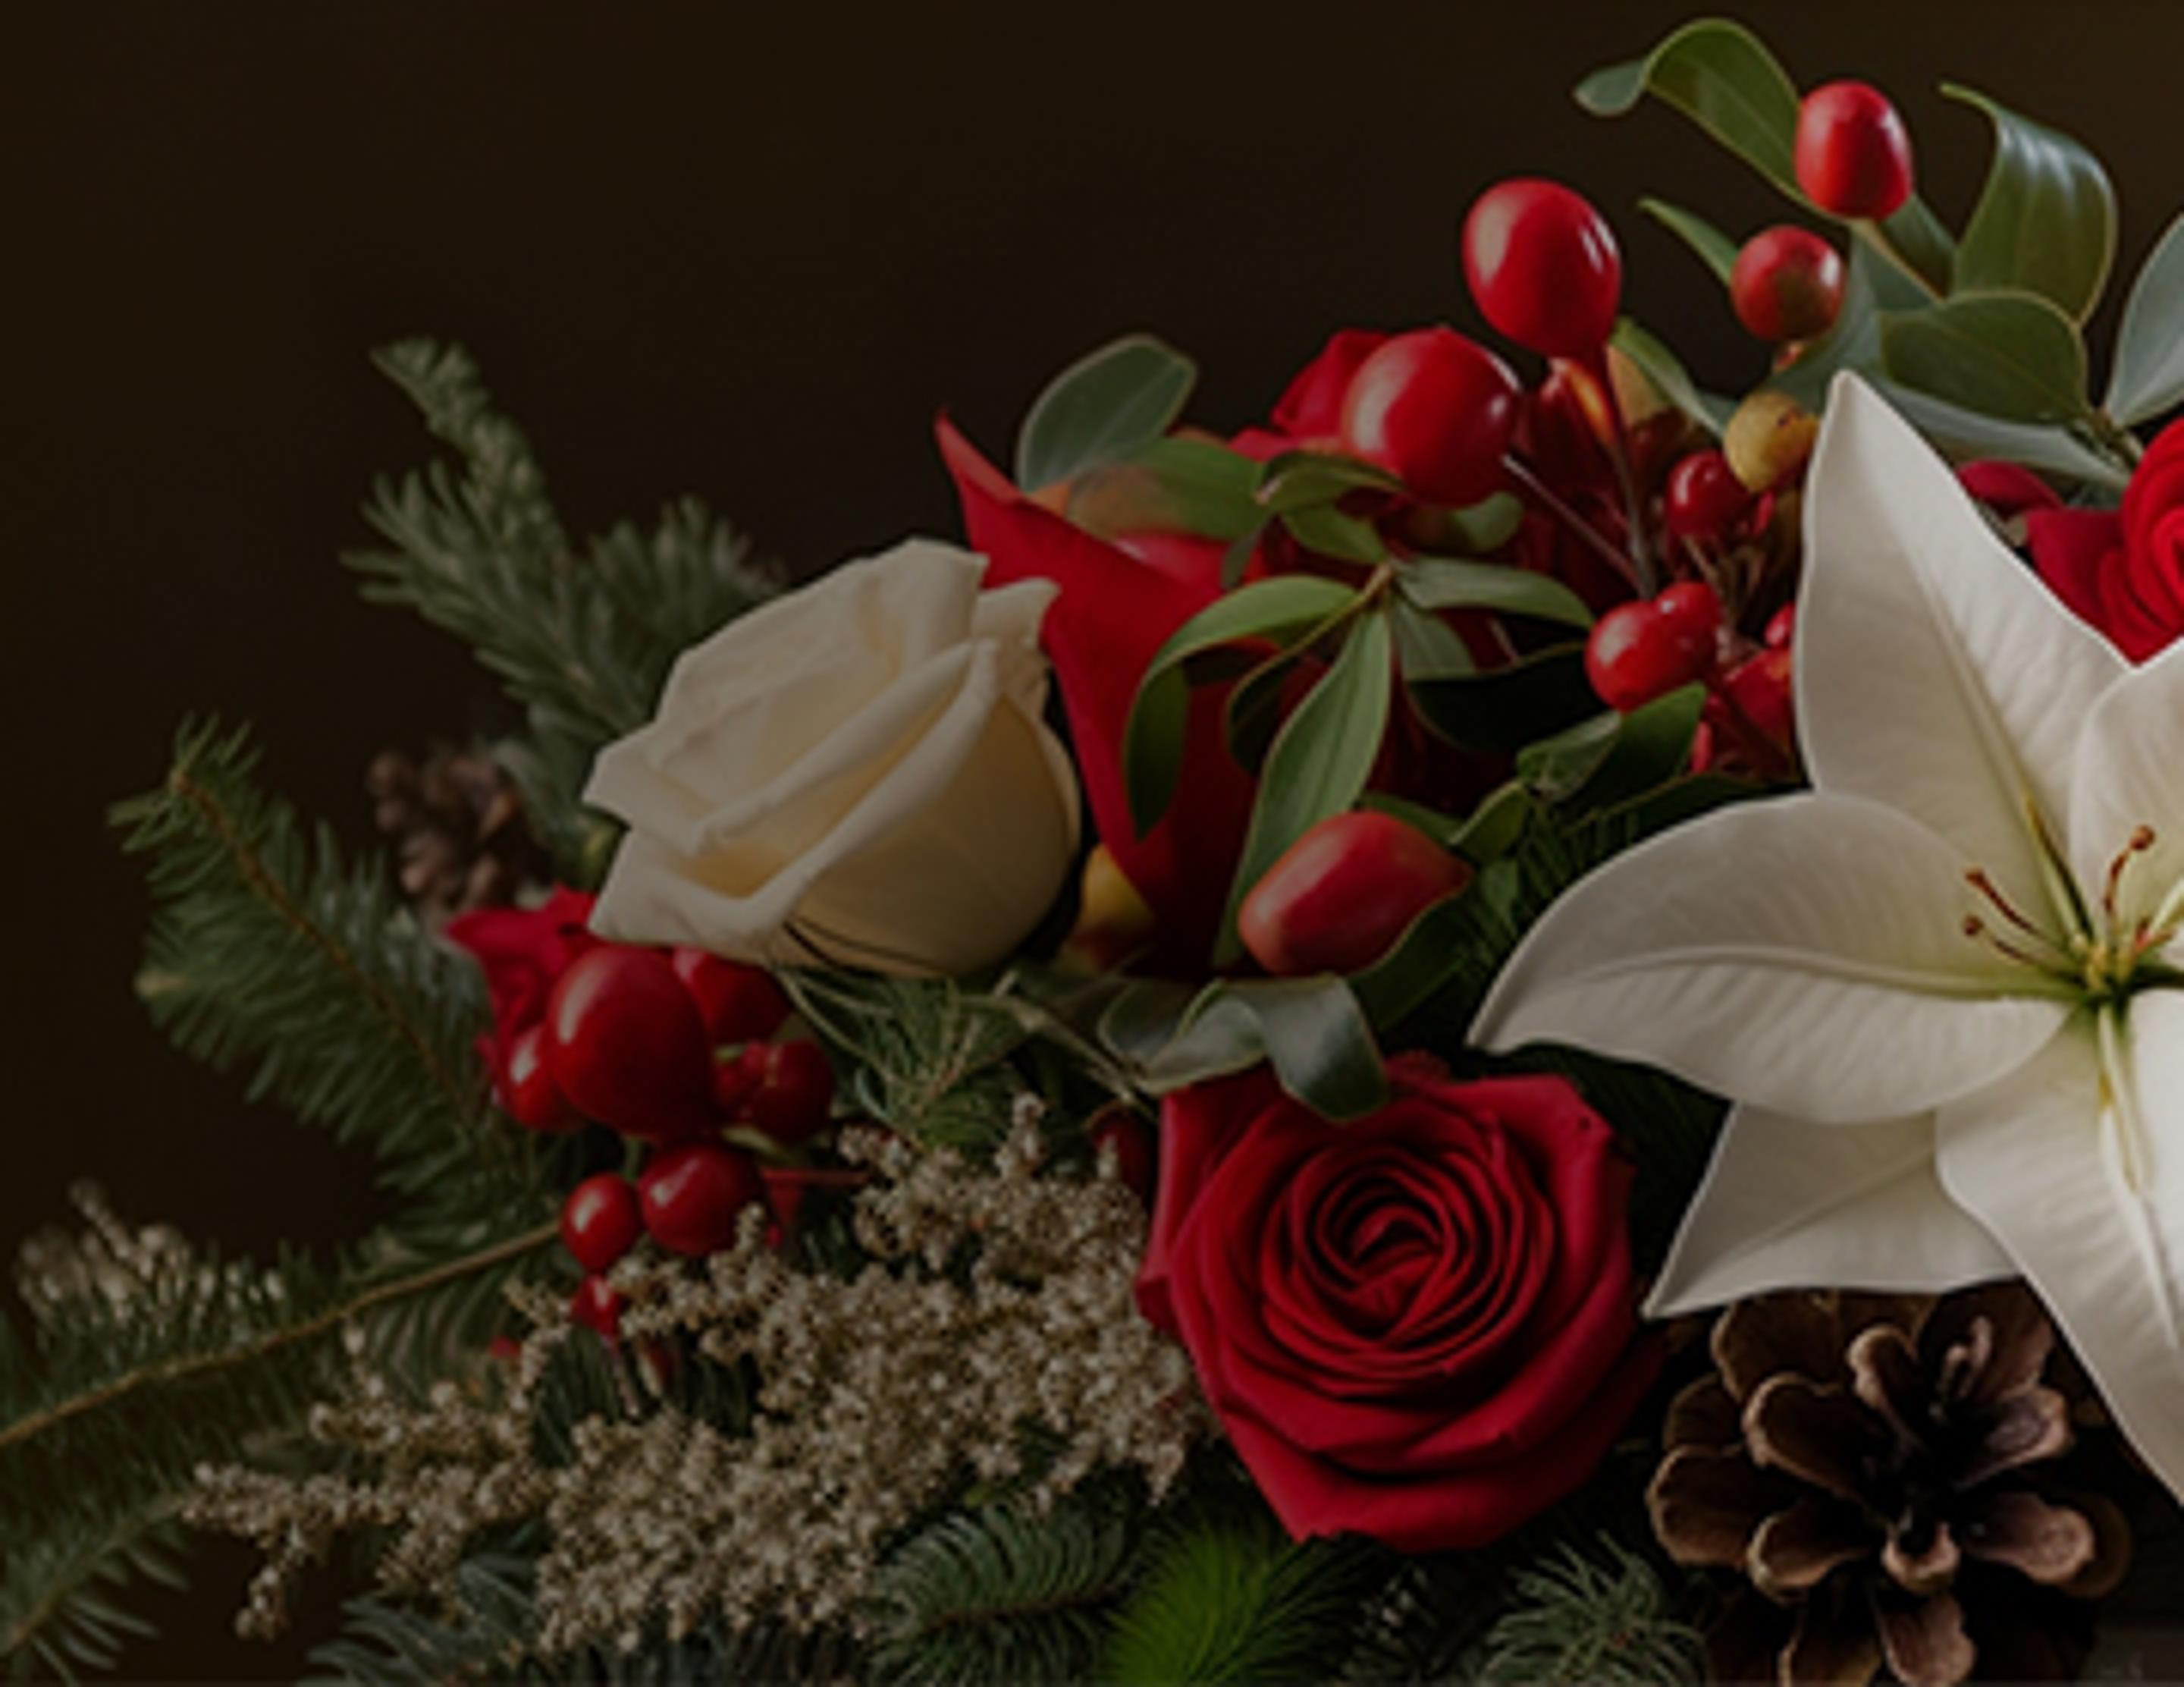 Holiday-themed floral arrangement with red roses, white roses, and holly.